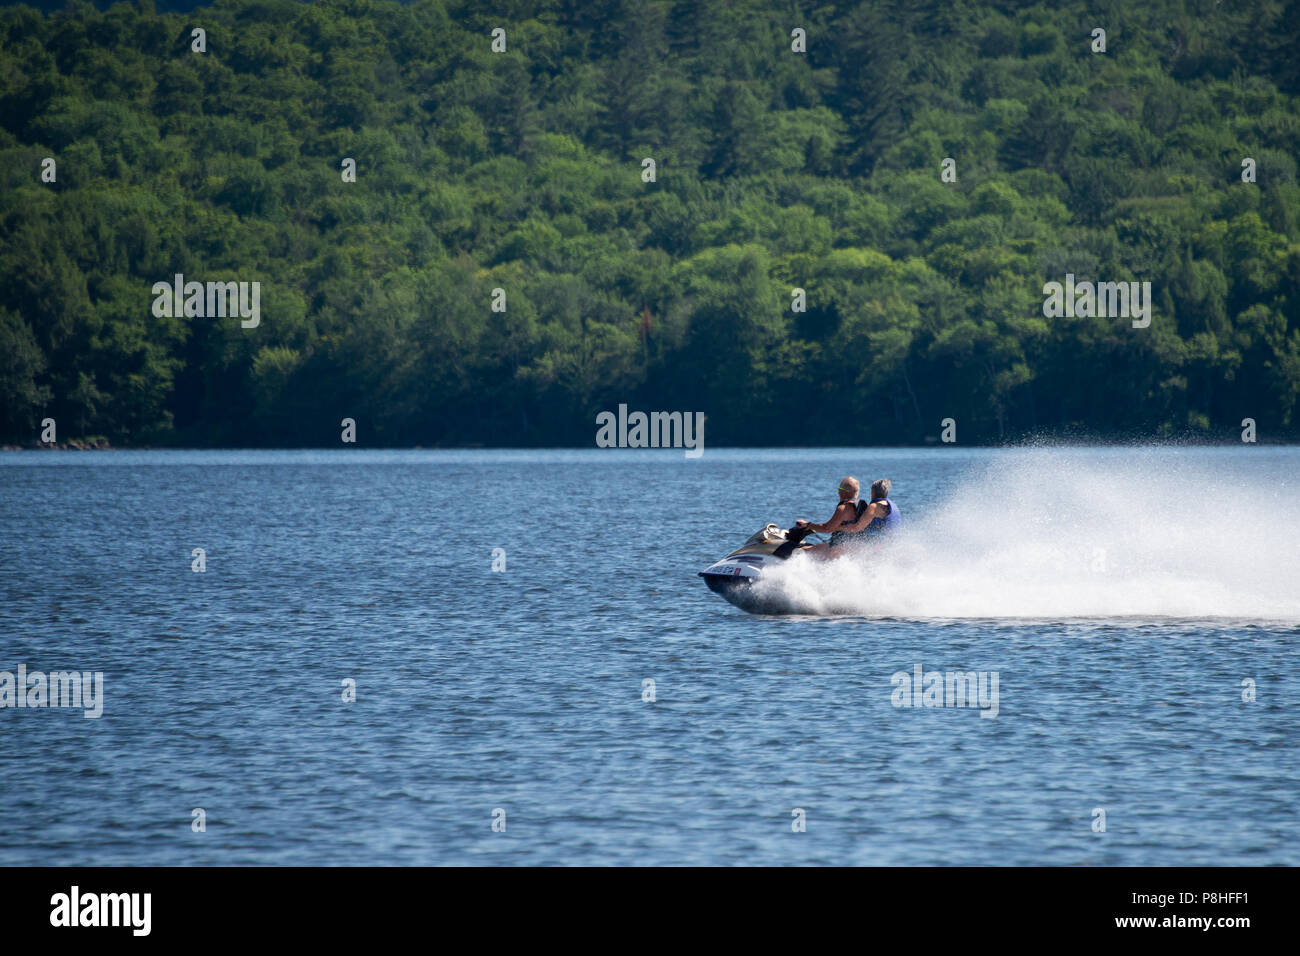 A fast jet propelled personal watercraft skimming over the water on Lake Pleasant, NY in the Adirondack Mountains. Stock Photo